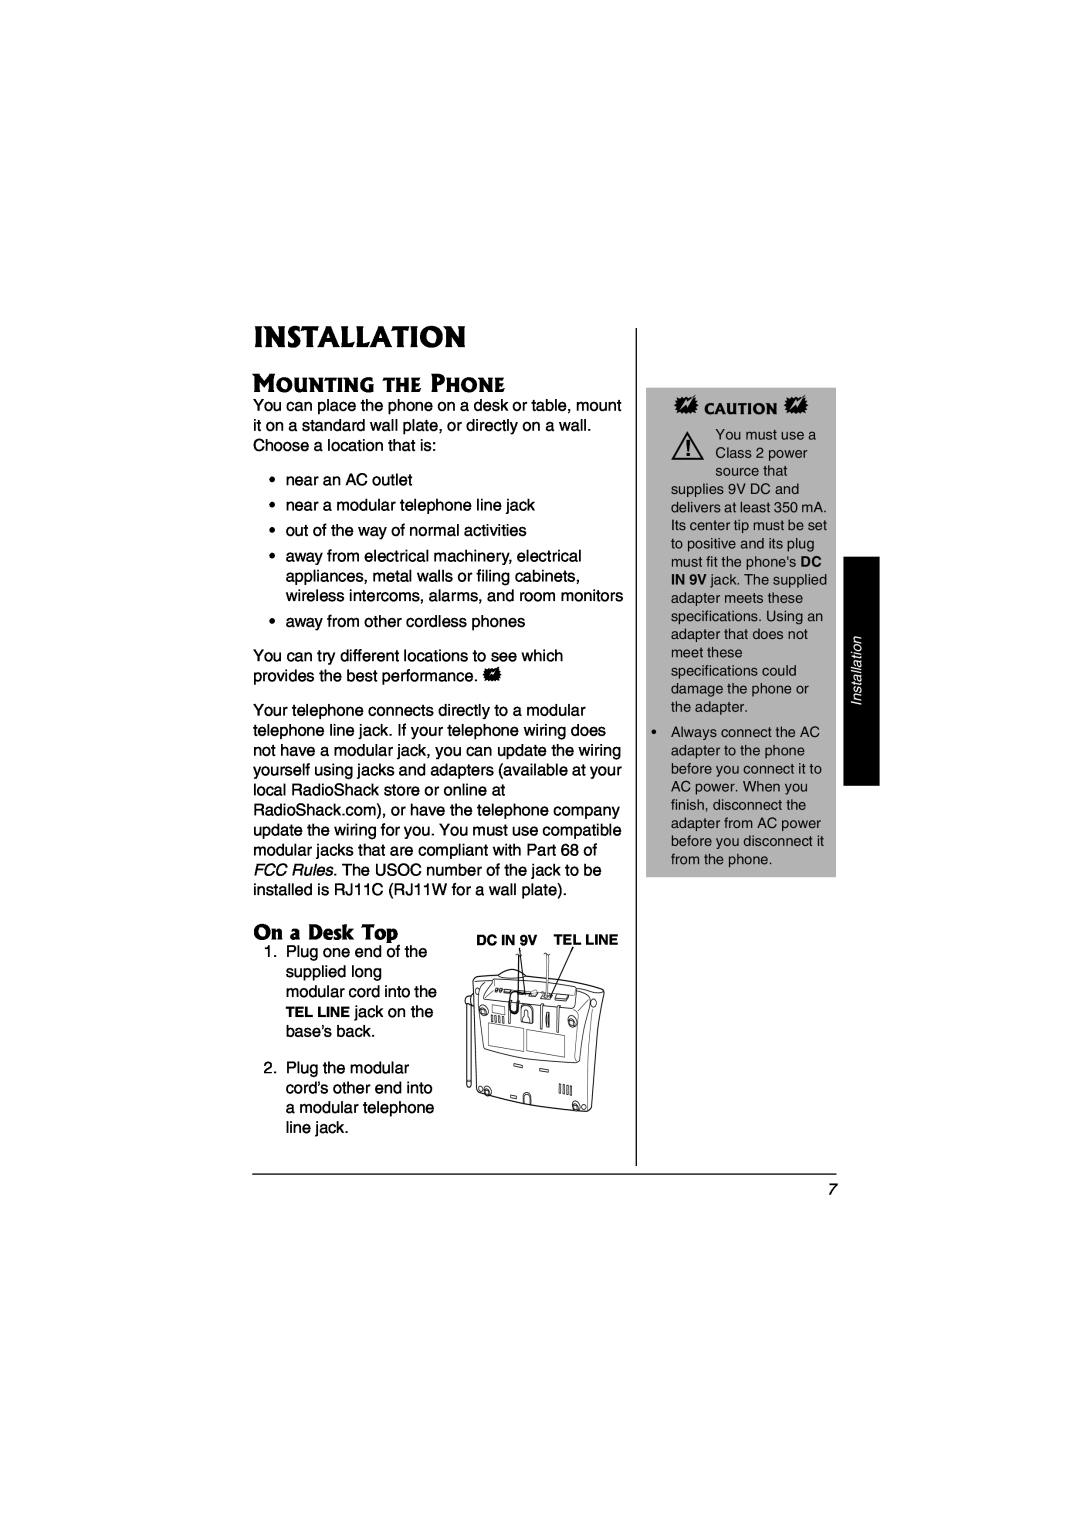 Radio Shack 43-3823 owner manual Installation, On a Desk Top, Mounting The Phone 